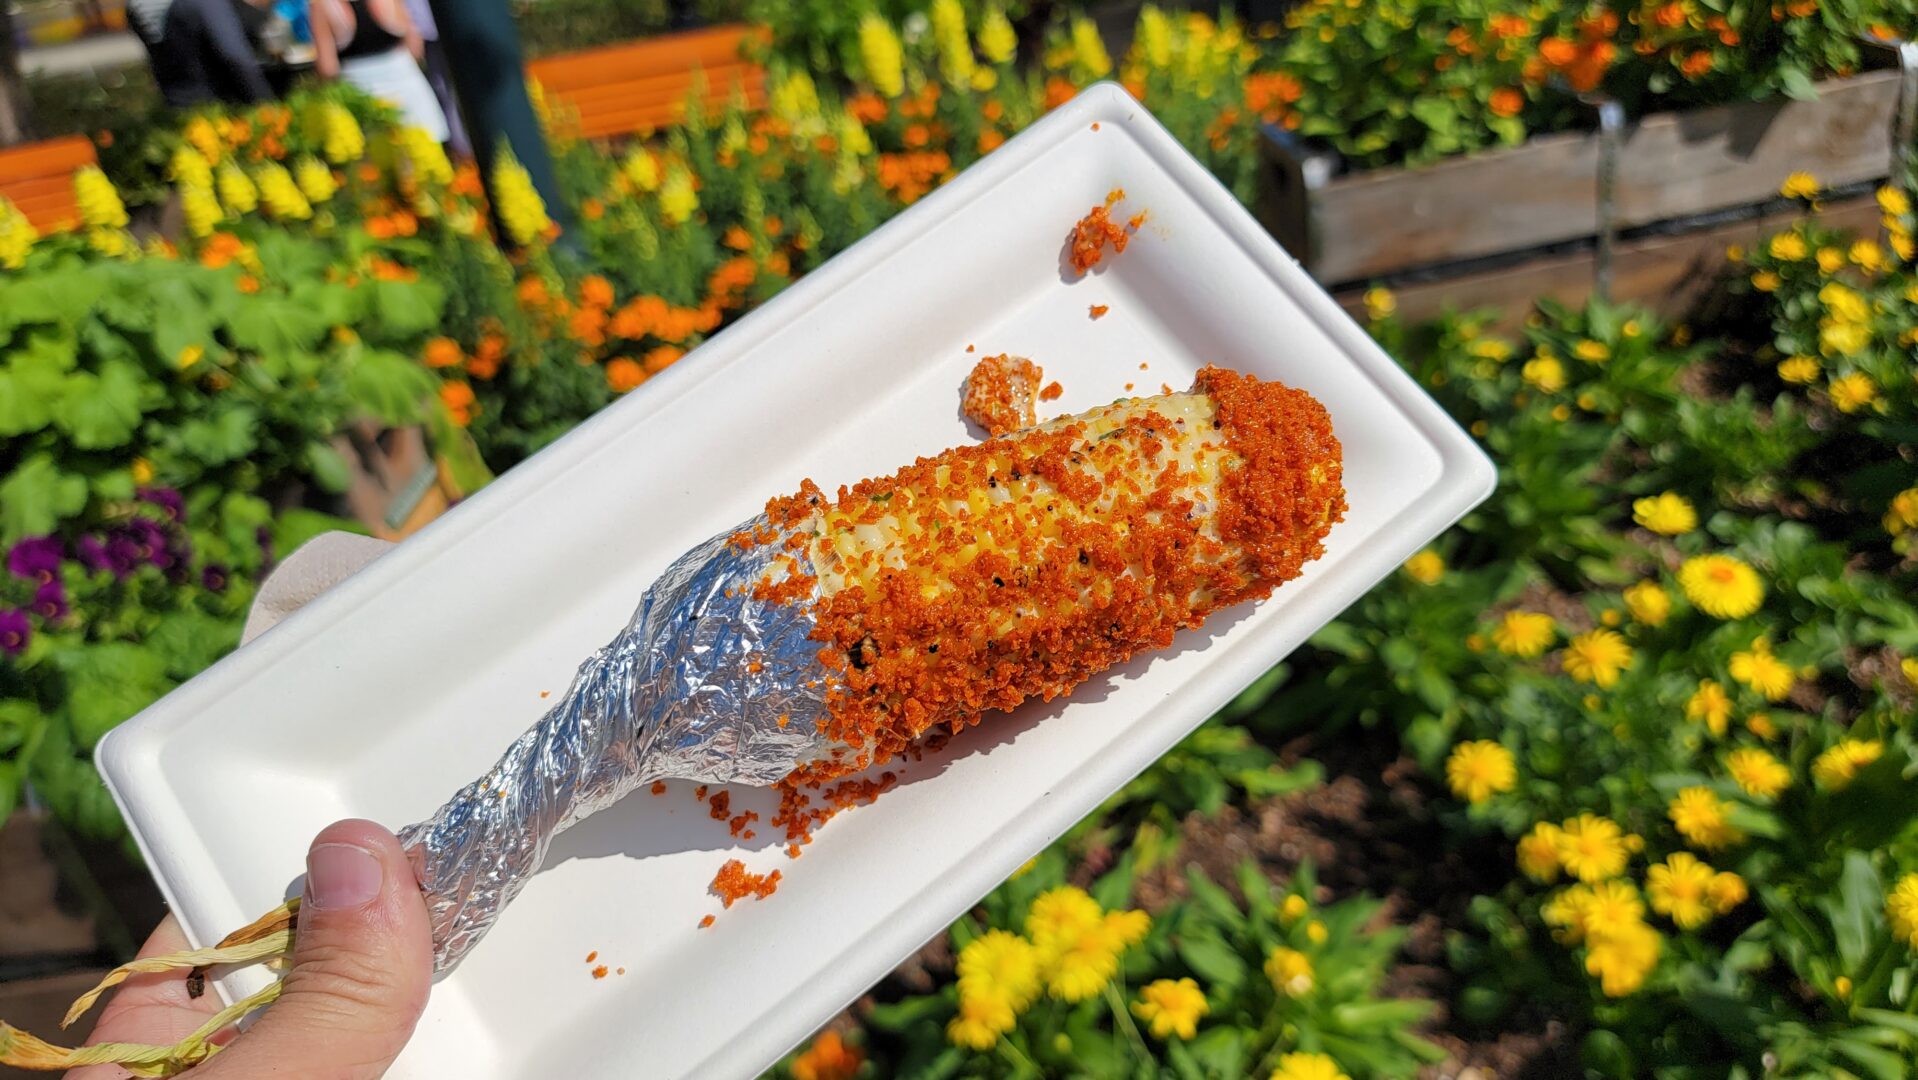 Grilled Street Corn on the Cob was one of the Best Things we ate at the EPCOT Flower & Garden Festival